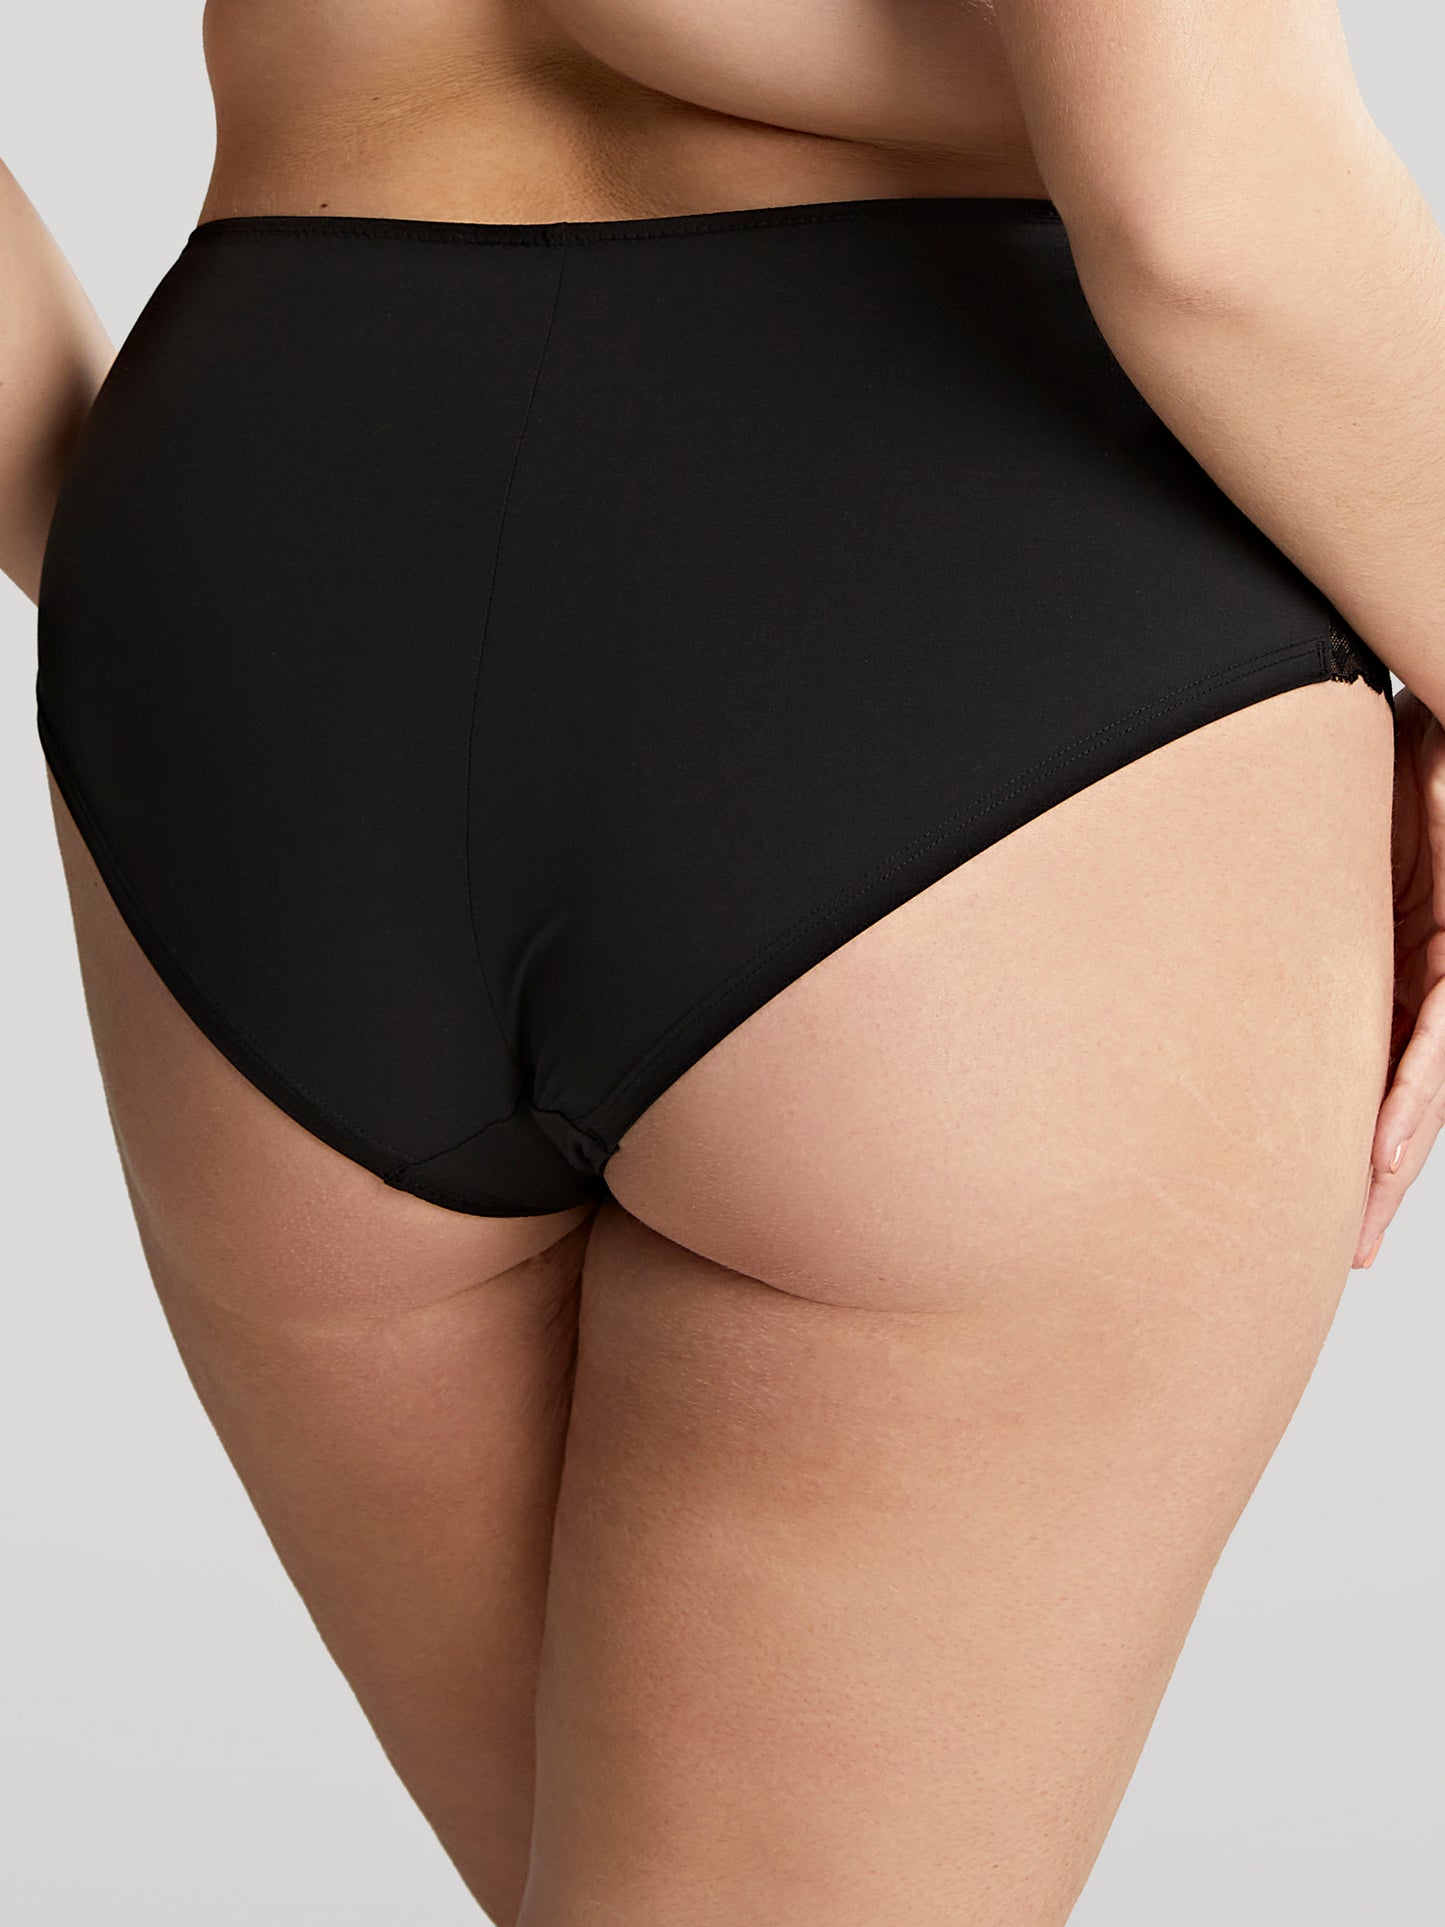 Bliss Deep Brief - Noir worn by model back view